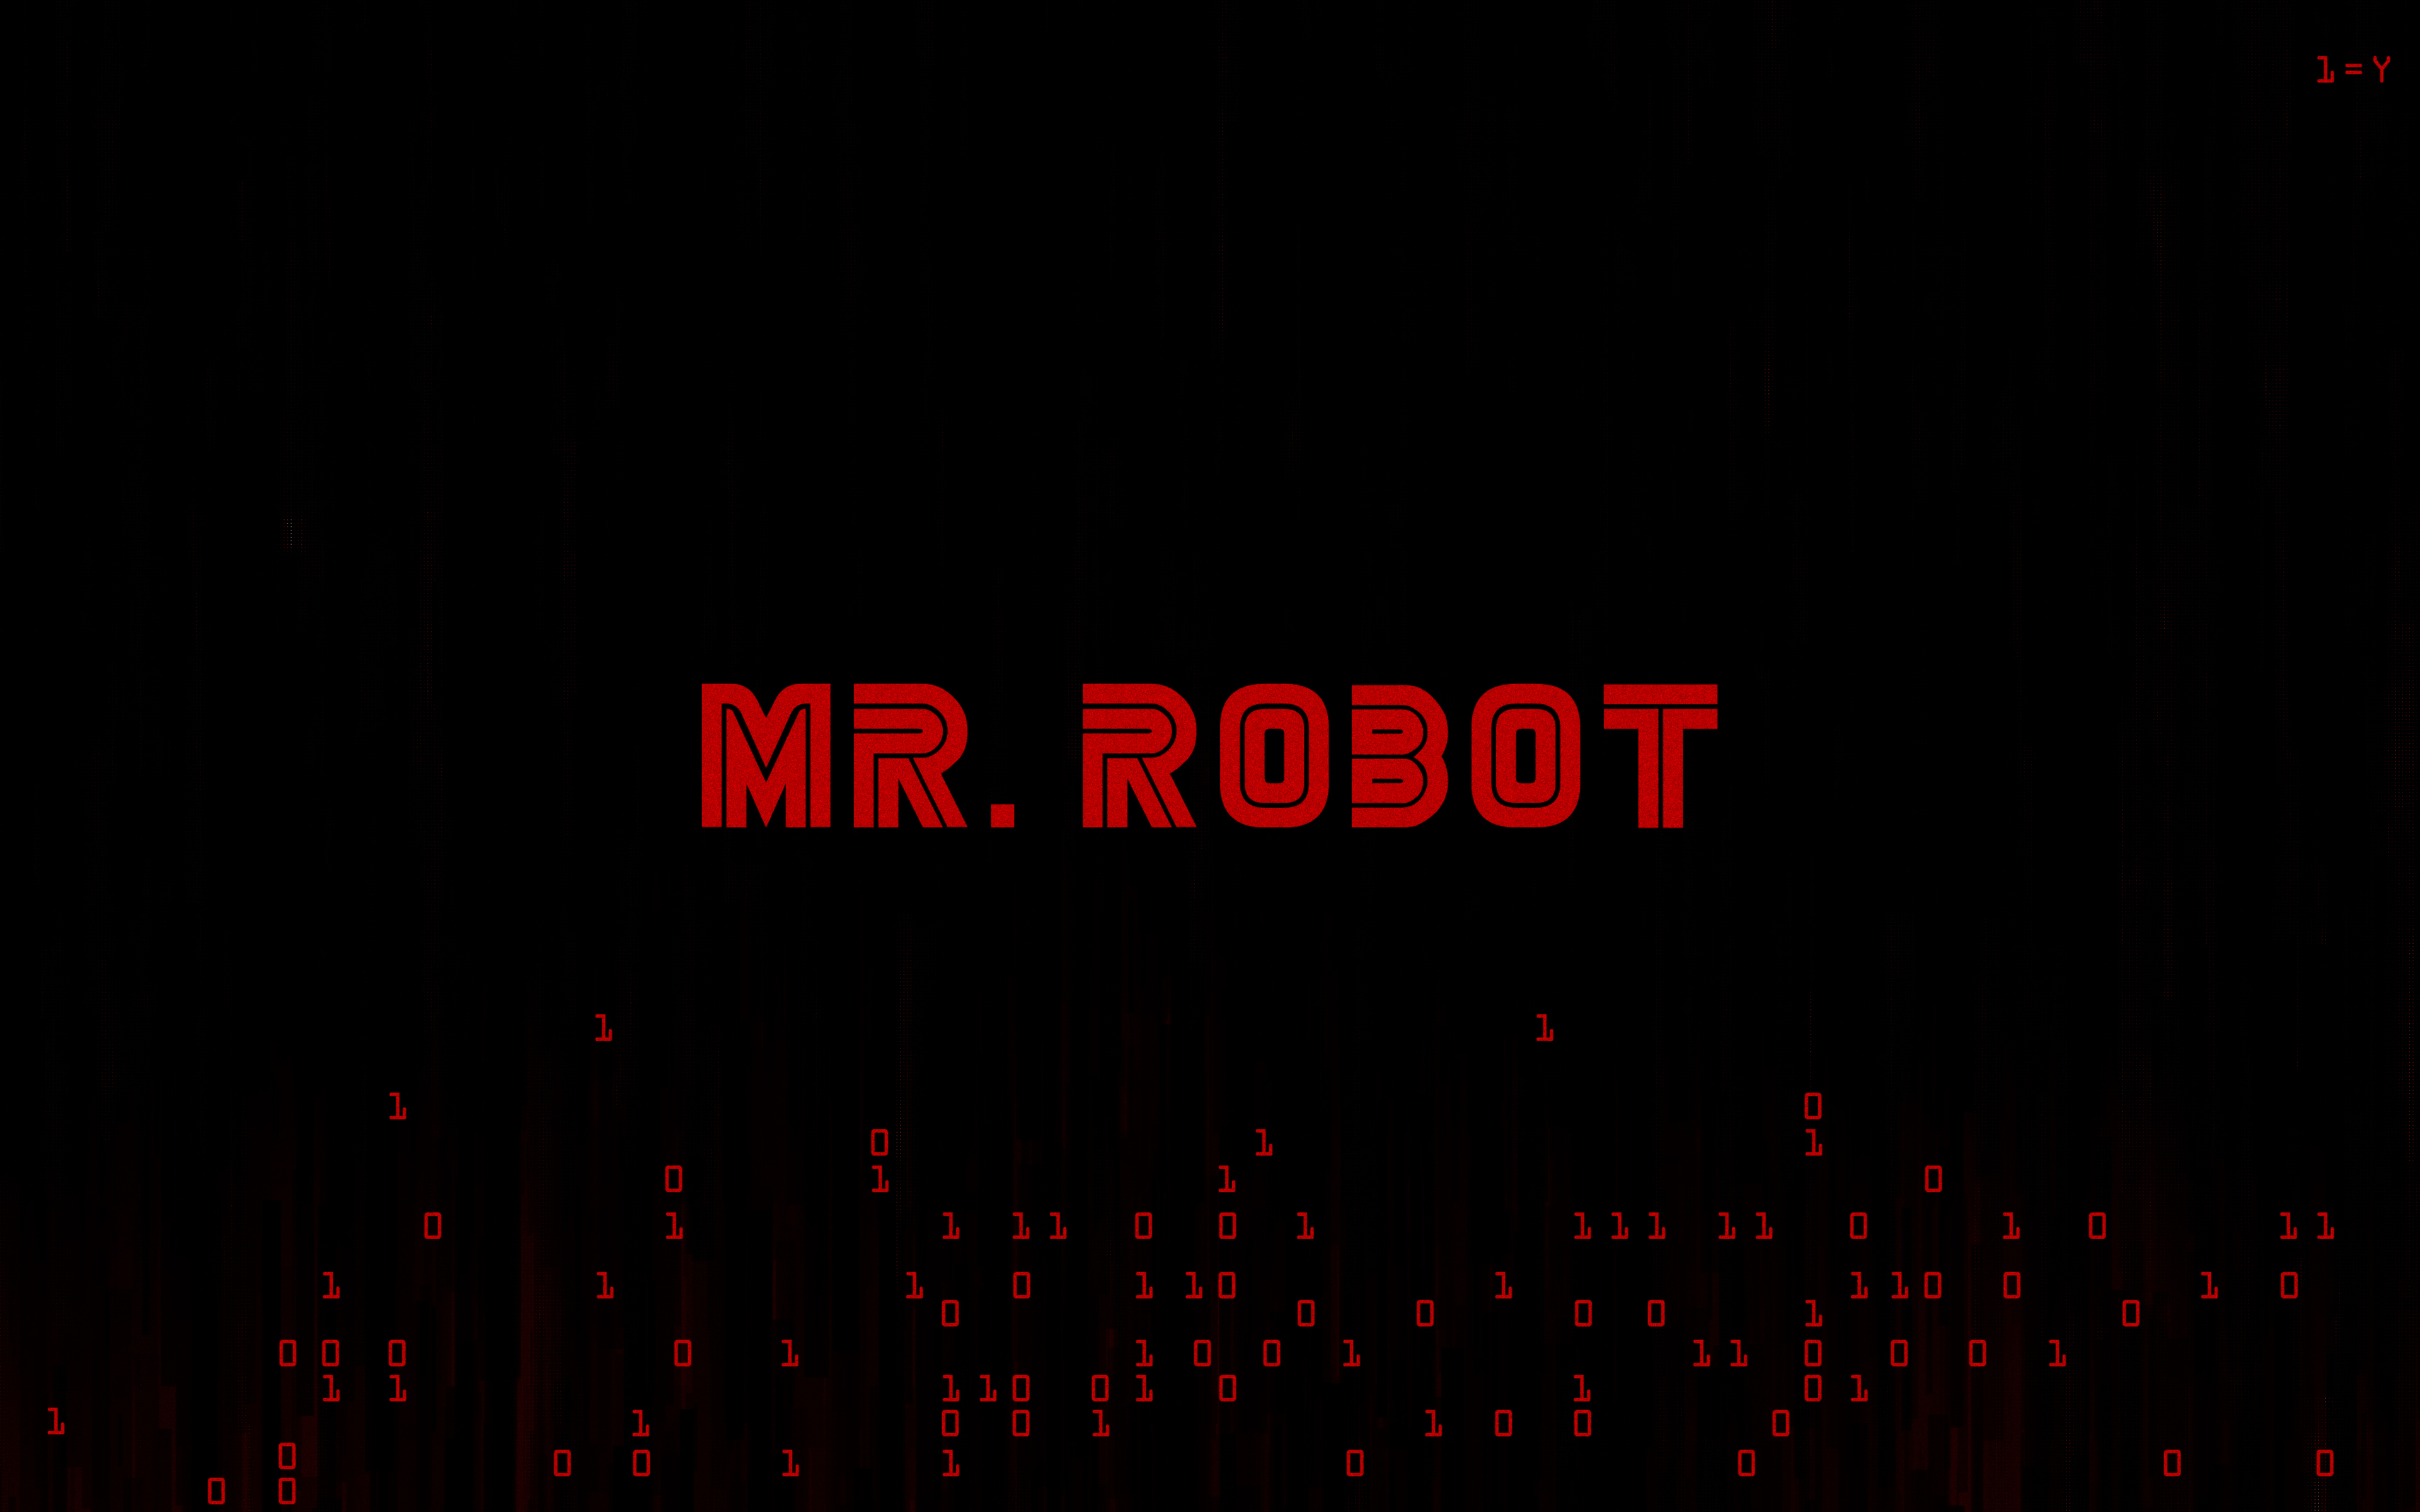 Download wallpaper Mr Robot, 4k, TV Series, 2018 movie, minimal, logo for desktop with resolution 3840x2400. High Quality HD picture wallpaper